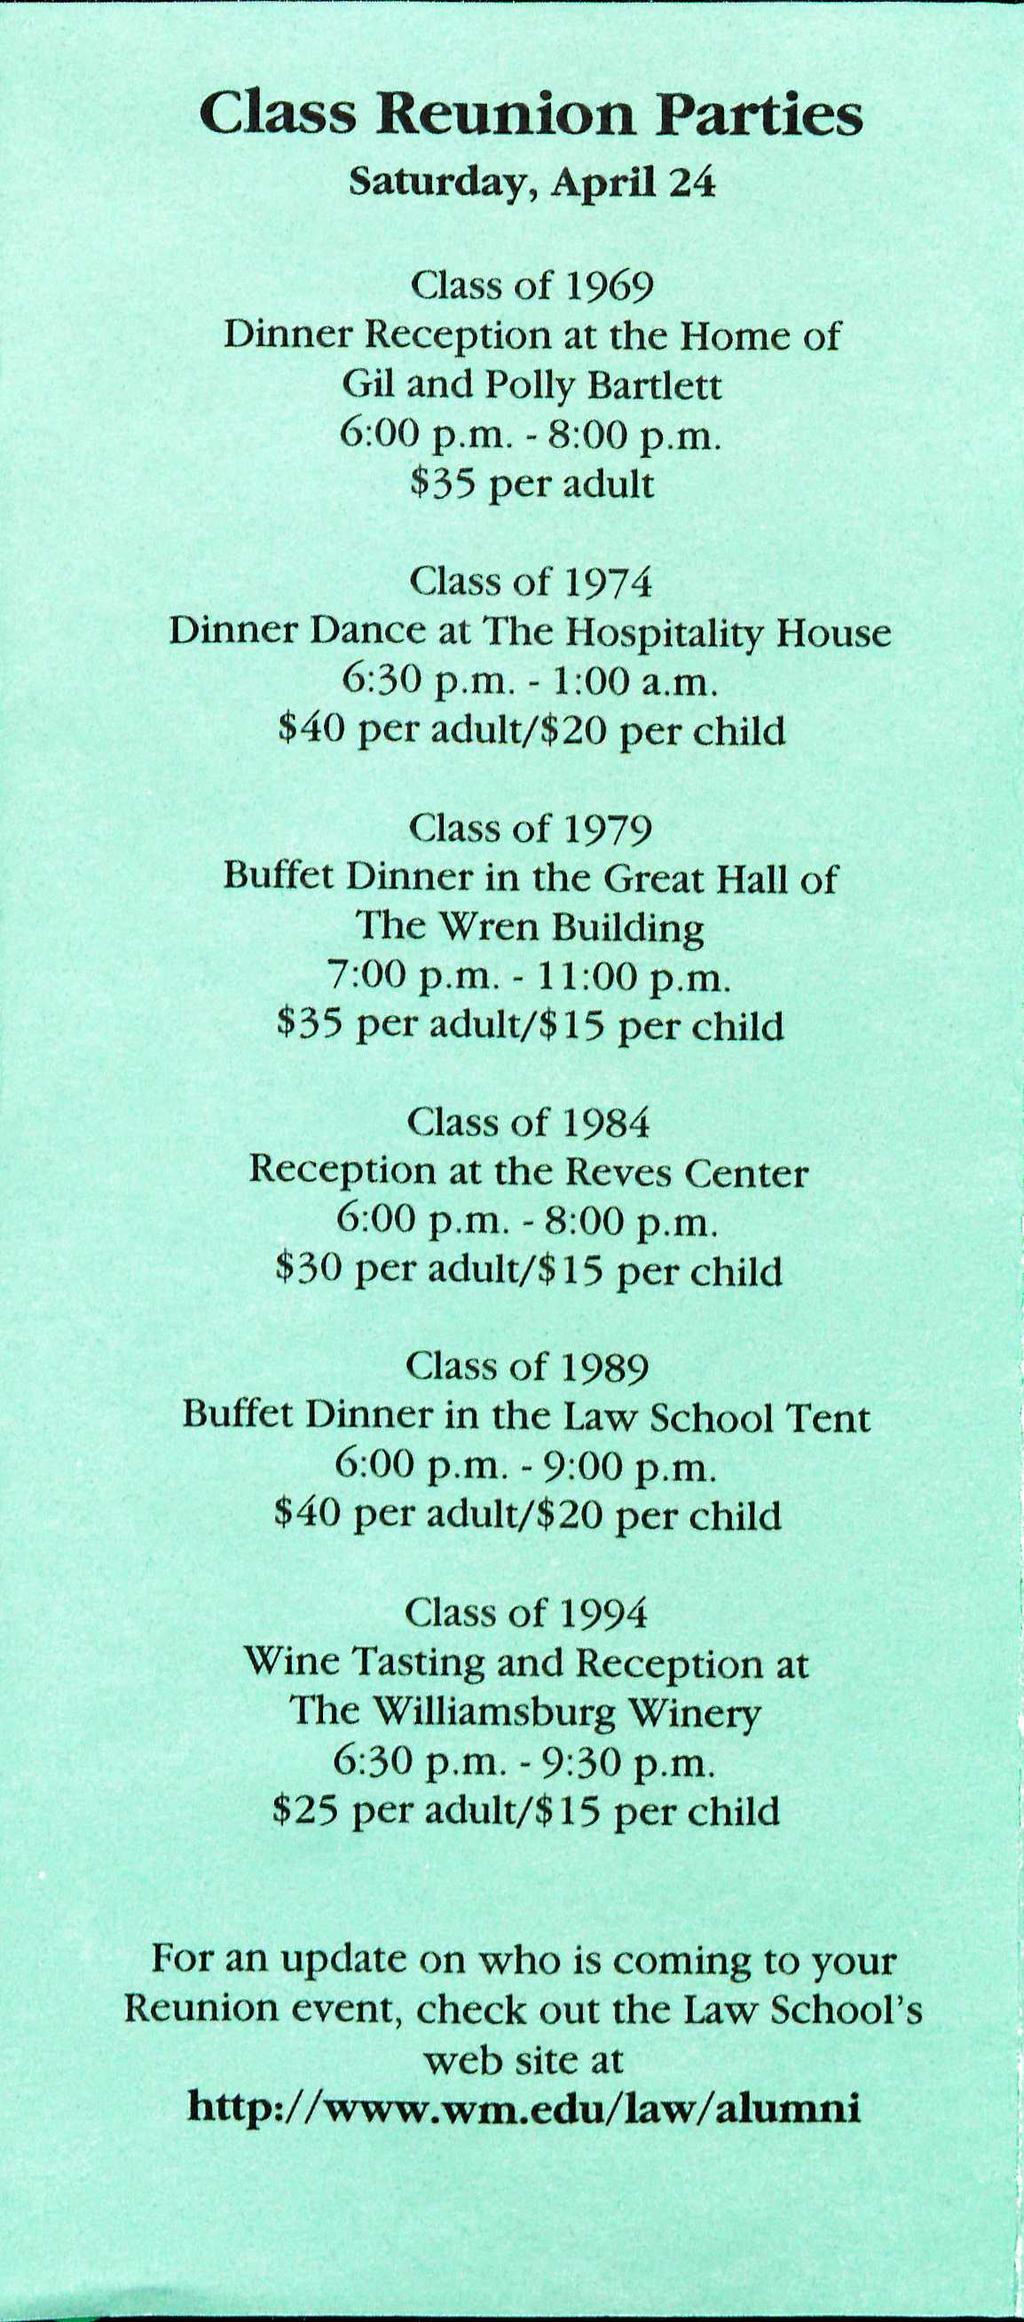 Class Reunion Parties Saturday, April 24 Class of 1969 Dinner Reception at the Home of Gil and Polly Bartlett 6:00 p.m. - 8:00 p.m. $35 per adult Class of 1974 Dinner Dance at The Hospitality House 6:30 p.